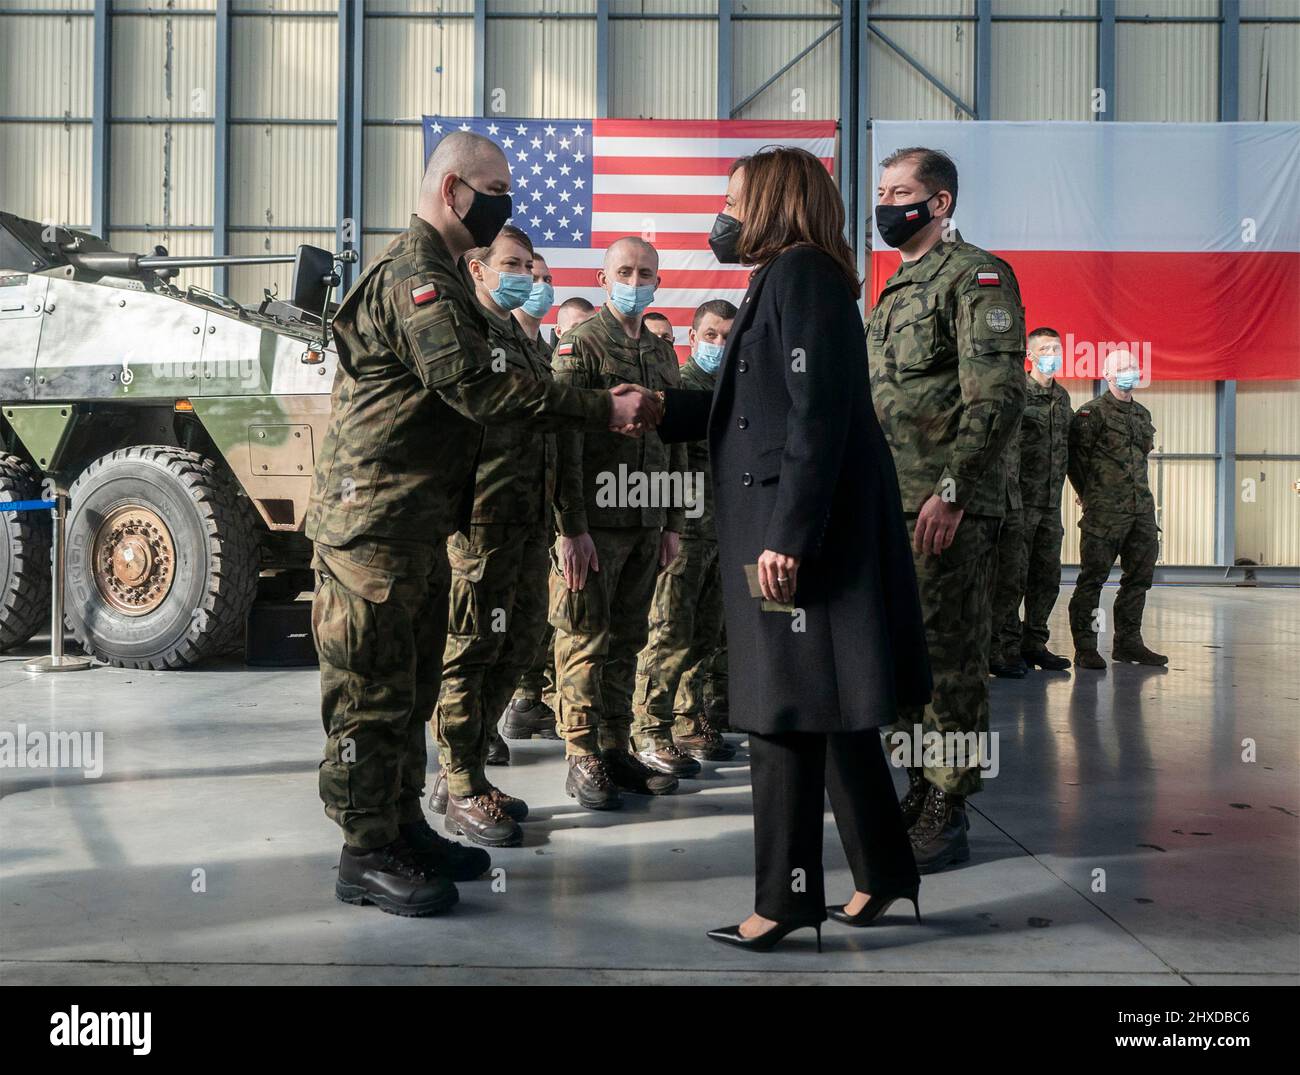 Warsaw, Poland. 11th Mar, 2022. U.S Vice President Kamala Harris, meets with Polish service members before departing for Romania at Warsaw Chopin International Airport, March 11, 2022 in Warsaw, Poland. Harris is in Poland to discuss the Ukraine crisis with NATO allies. Credit: Lawrence Jackson/White House Photo/Alamy Live News Stock Photo